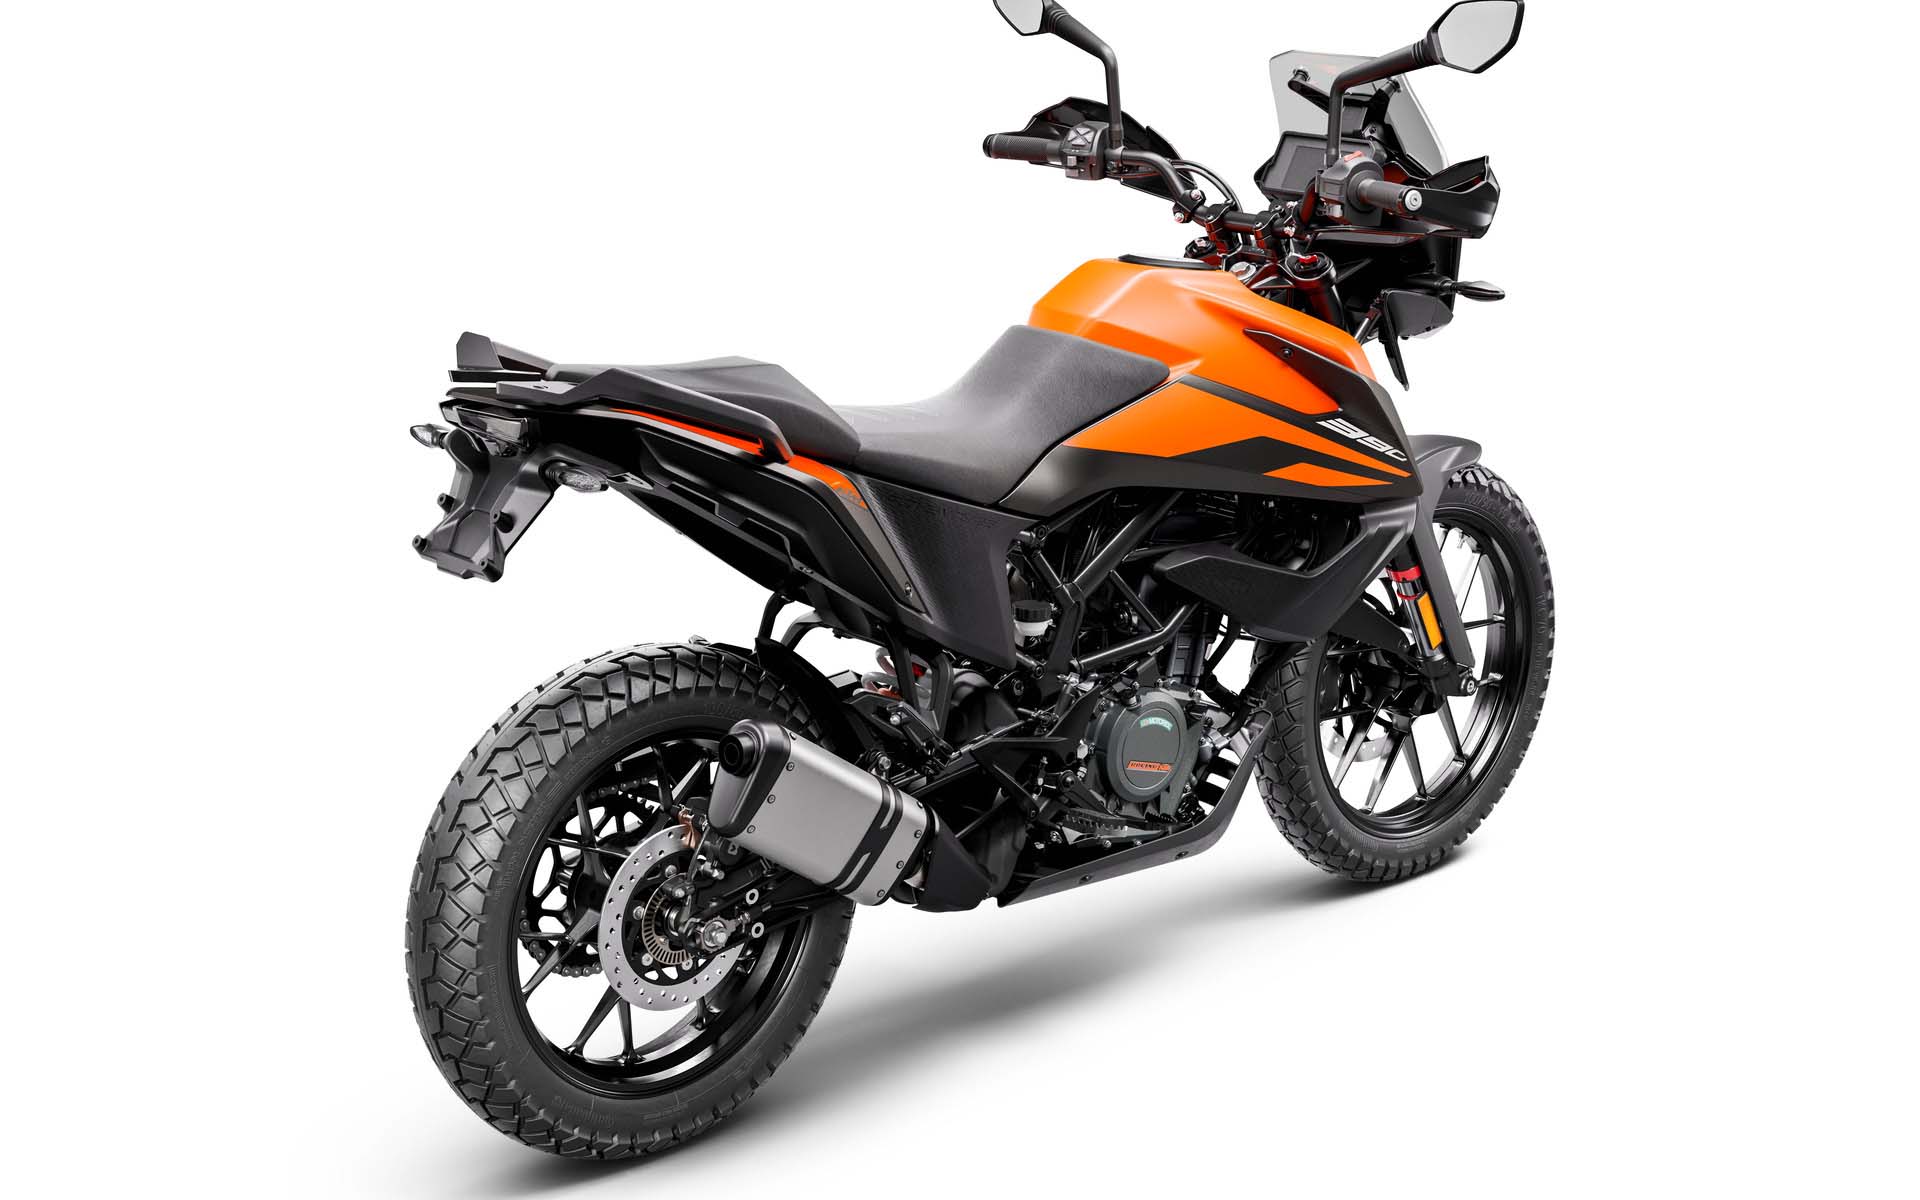 KTM 390 Adventure. USA Market Price & Delivery Date DriveMag Riders